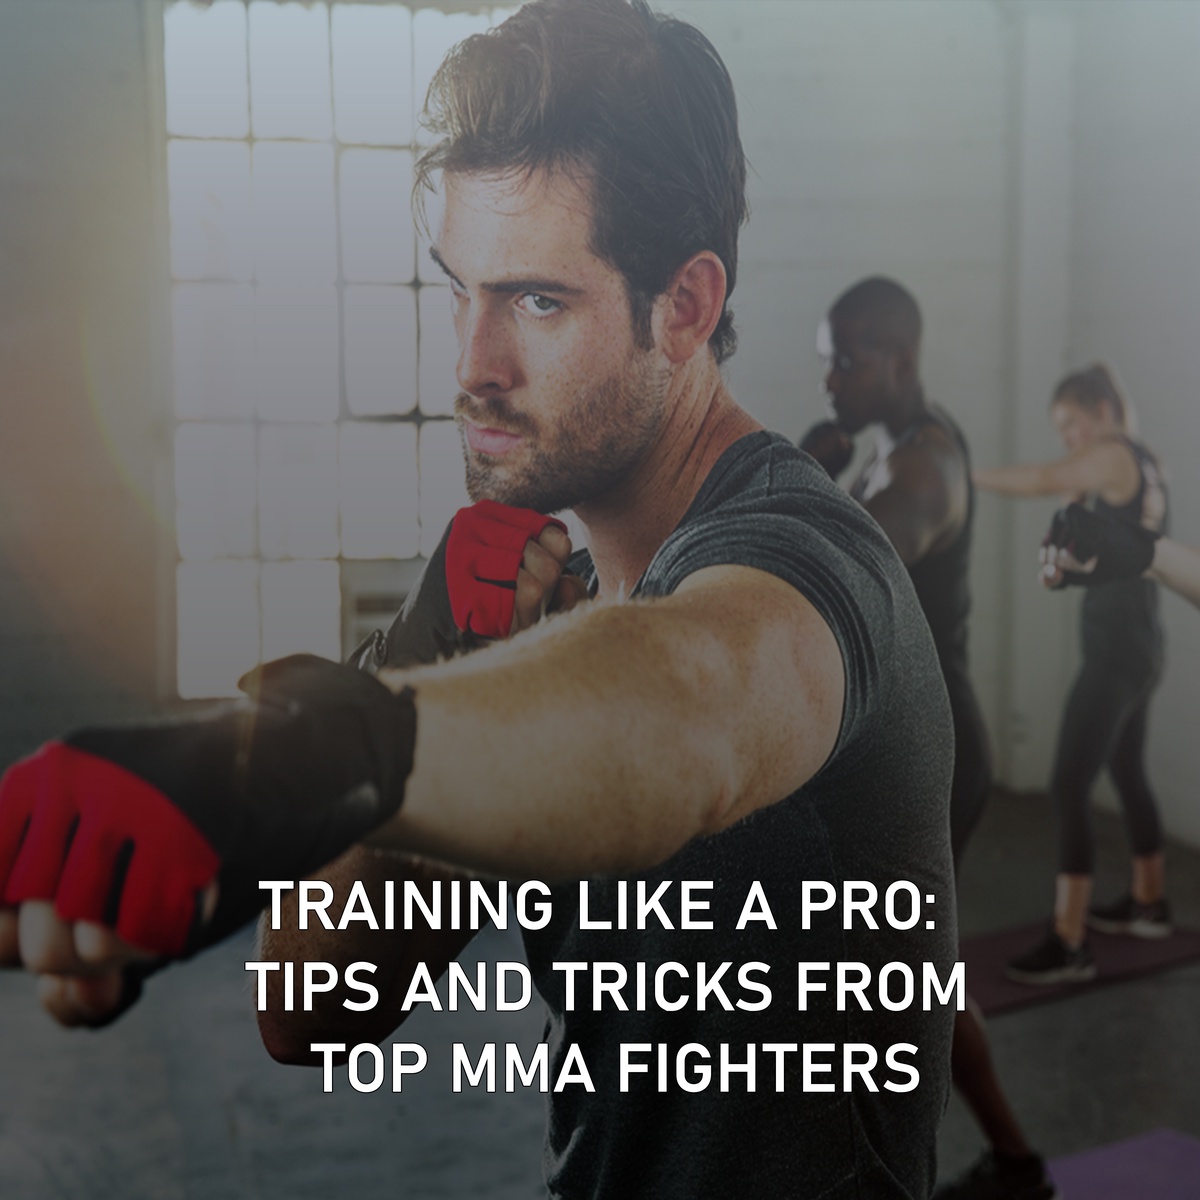 Training Like a Pro: Tips and Tricks from Top MMA Fighters